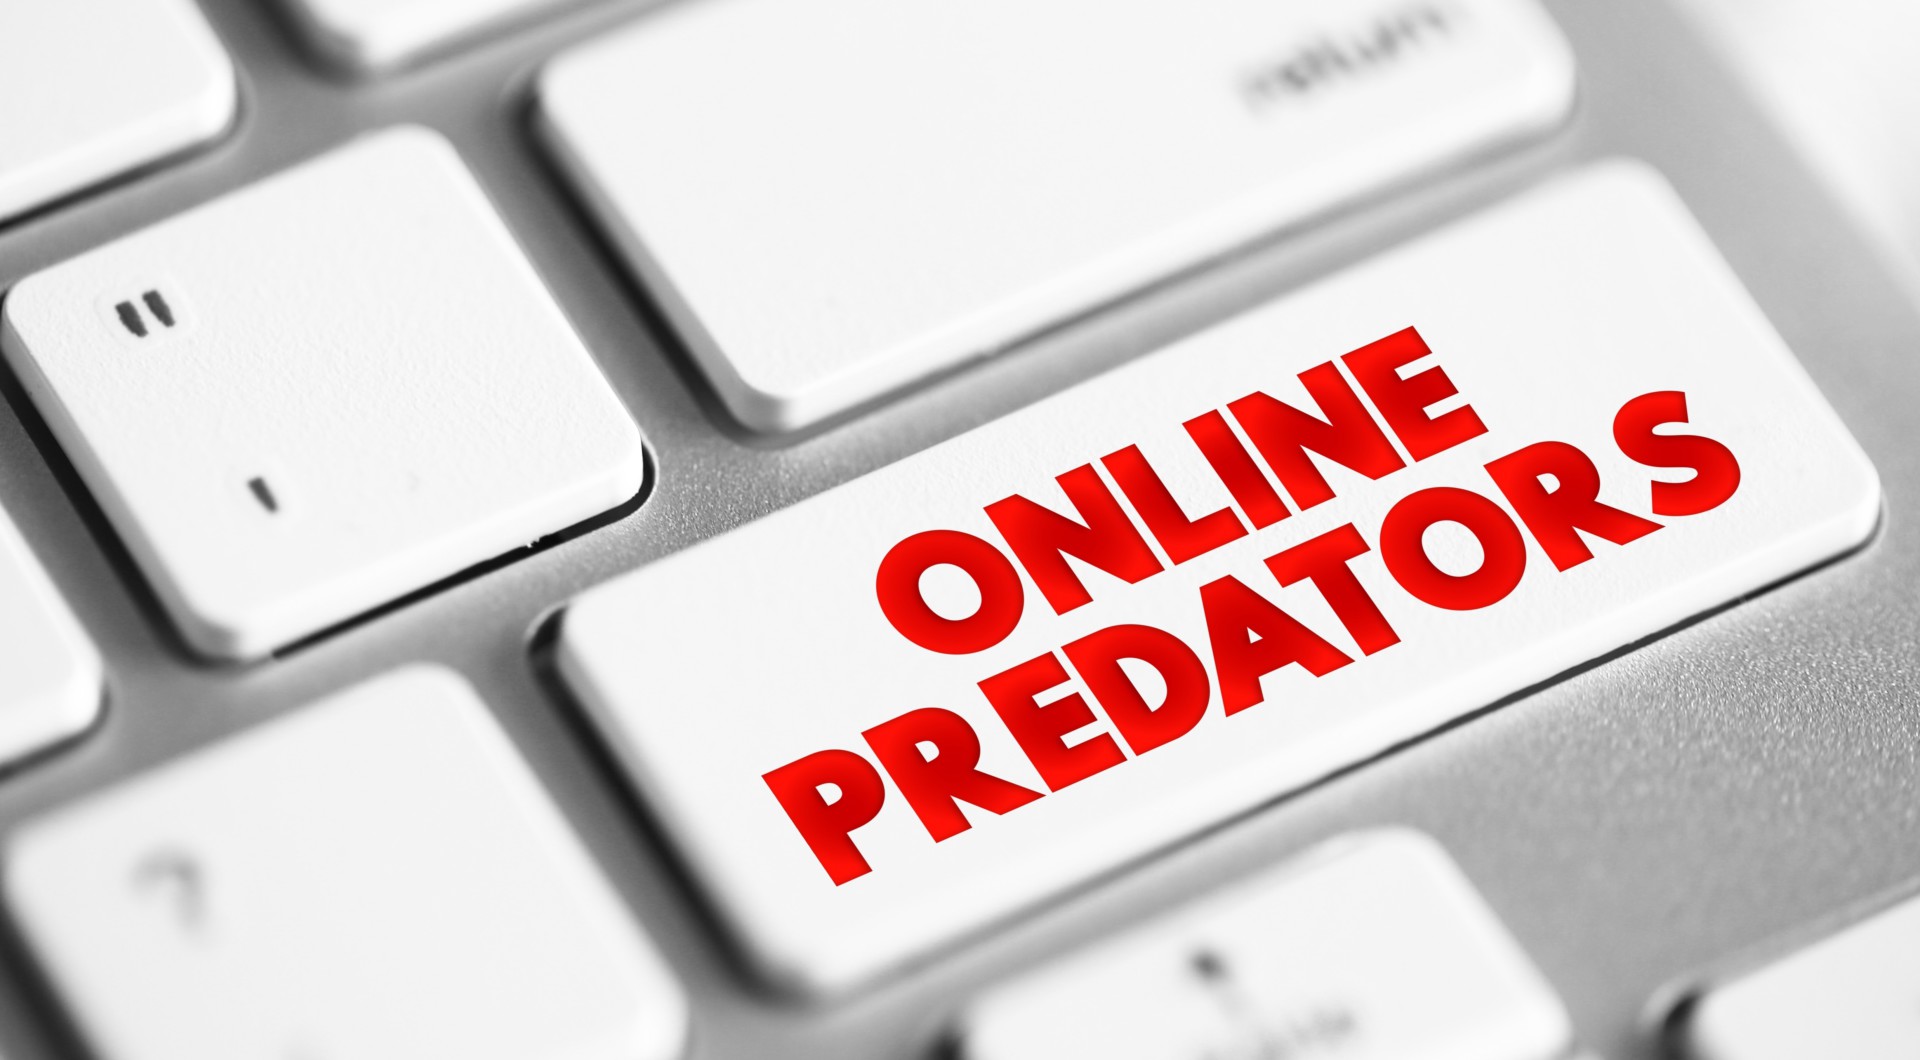 Police warn X-mas gadgets could be a gateway for online predators